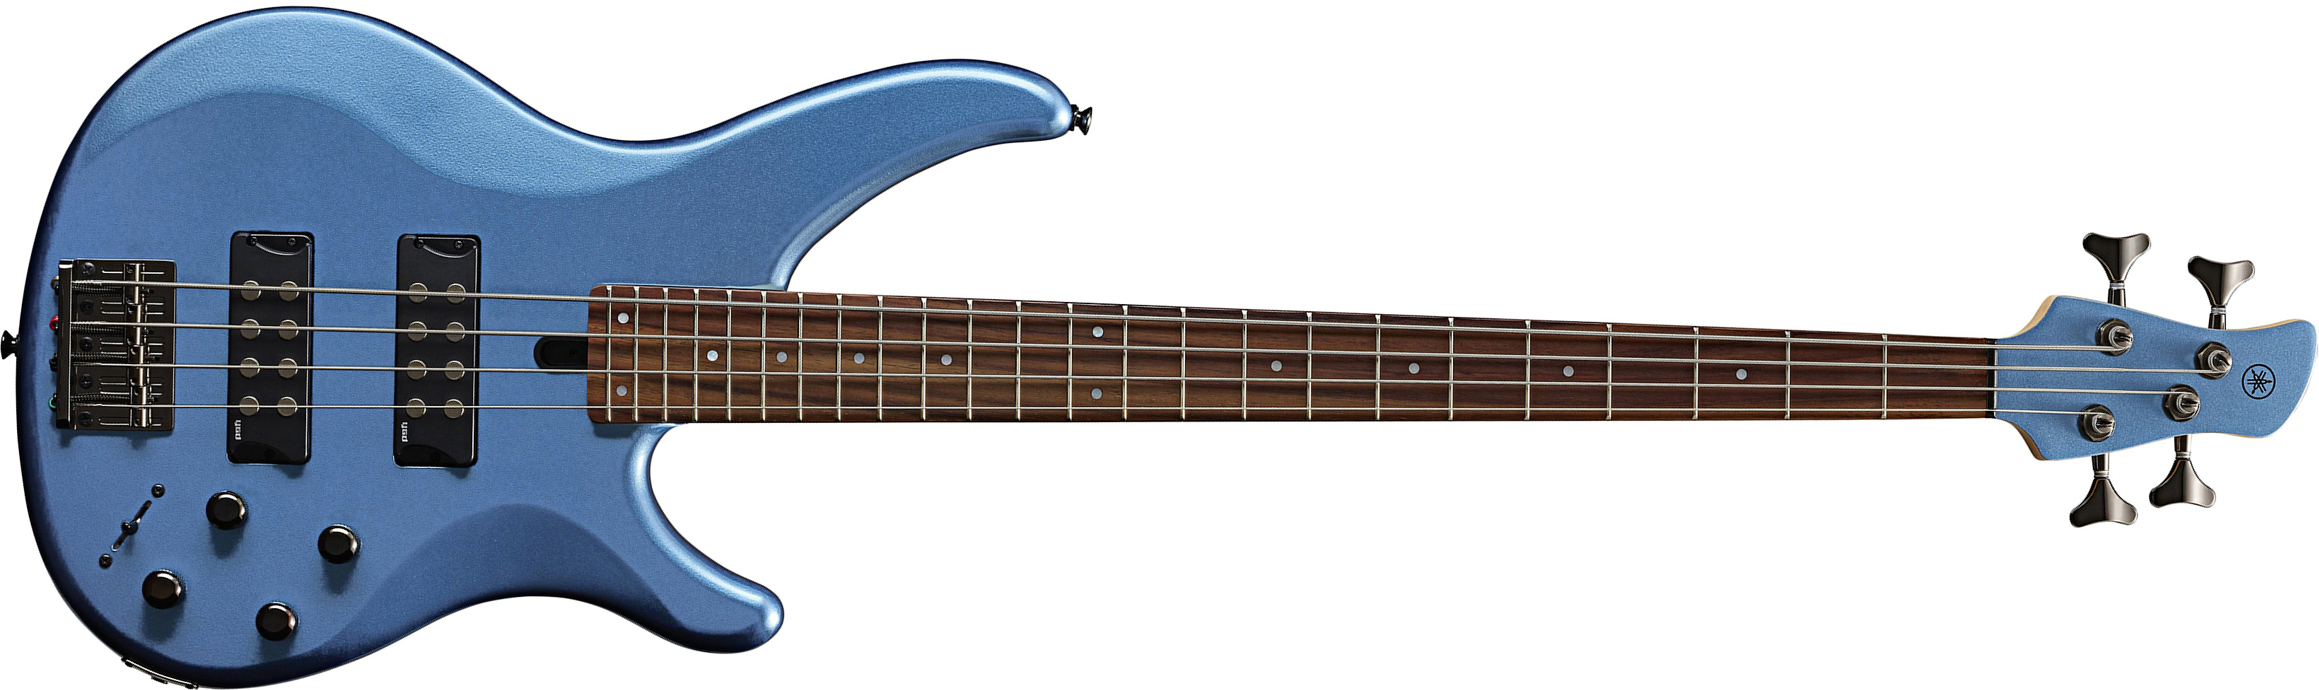 Yamaha Trbx305 5c Active Rw - Factory Blue - Solid body electric bass - Main picture